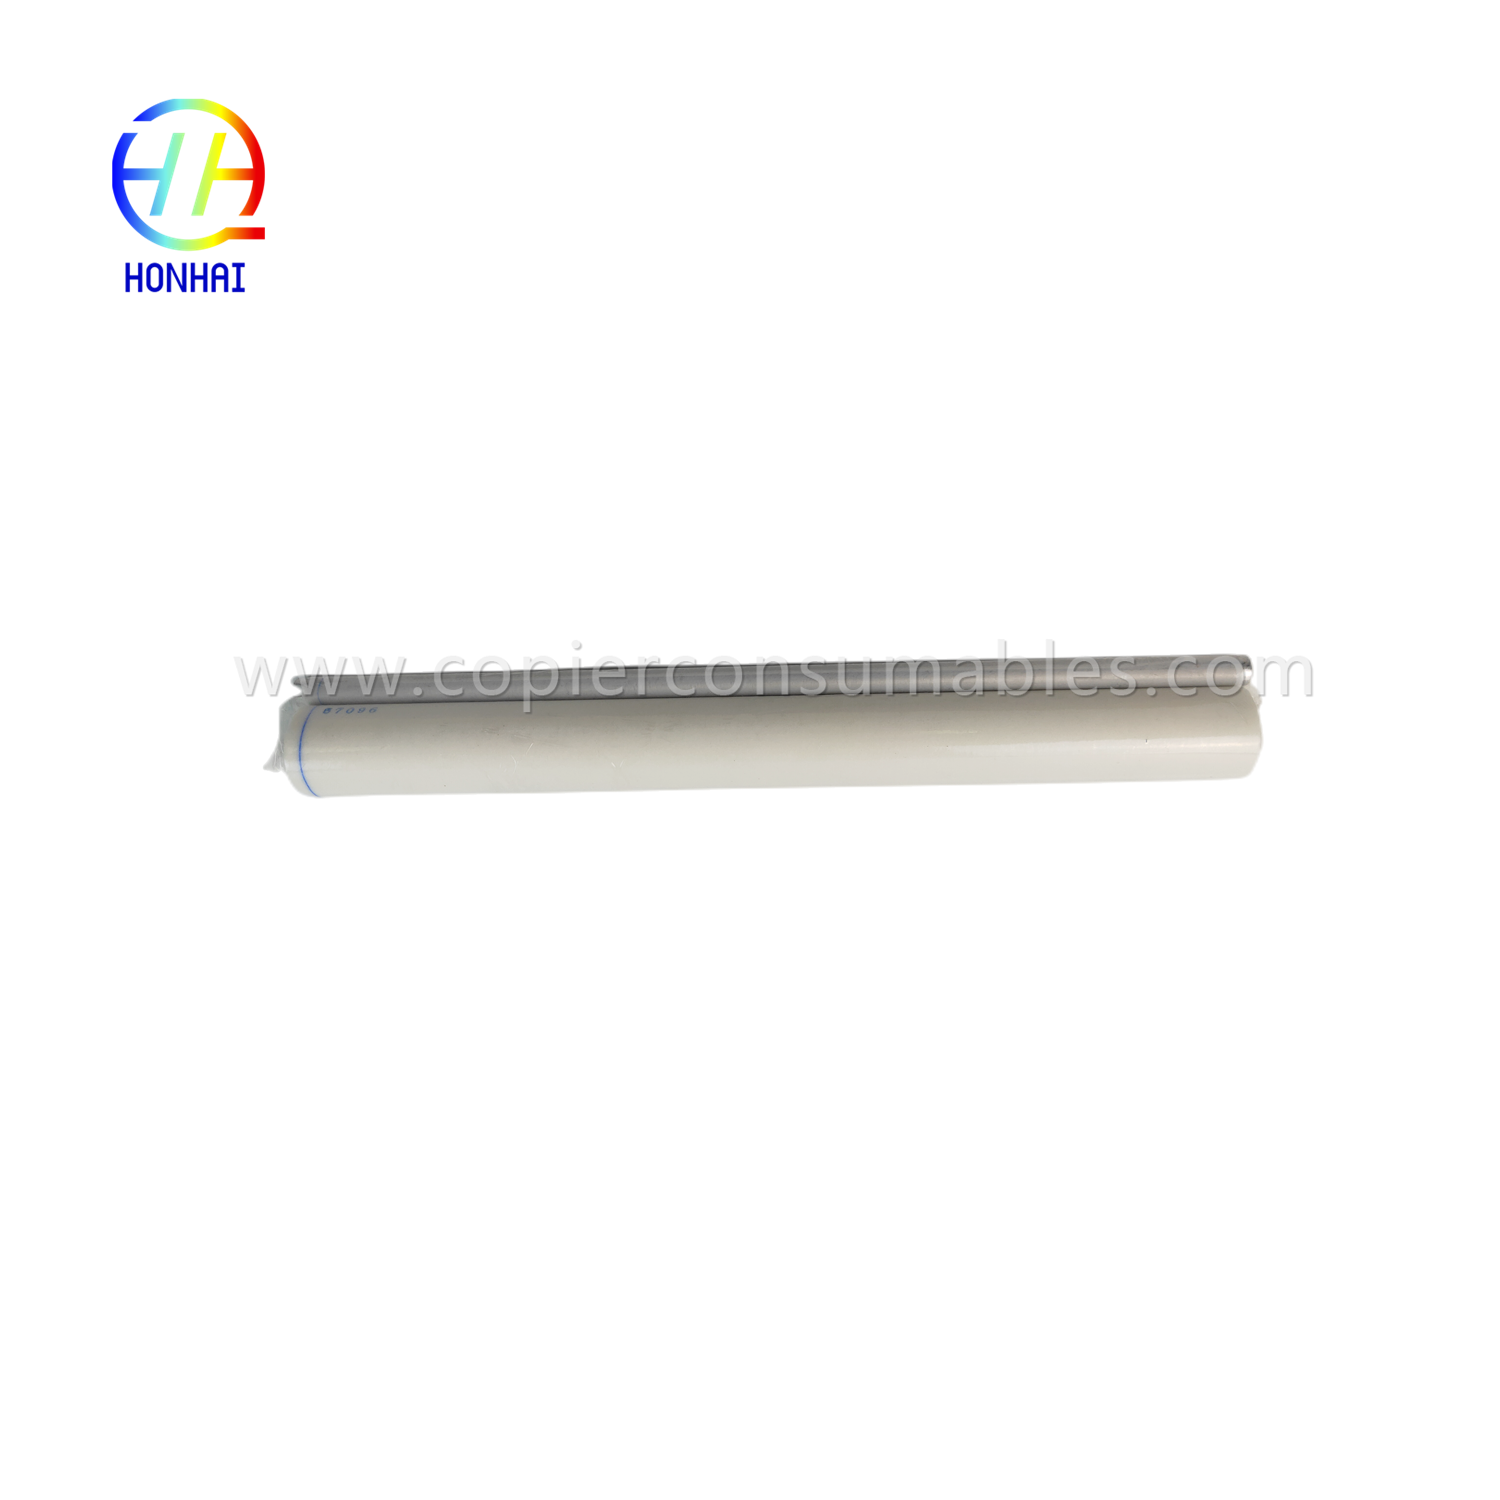 https://www.copierconsumables.com/fuser-cleaning-web-for-canon-ir6800-ir-8085-8095-8105-8205-8285-8295-fq-009-fc5-2286-000-oem-fuser- cleaning-fuser-roller-product/